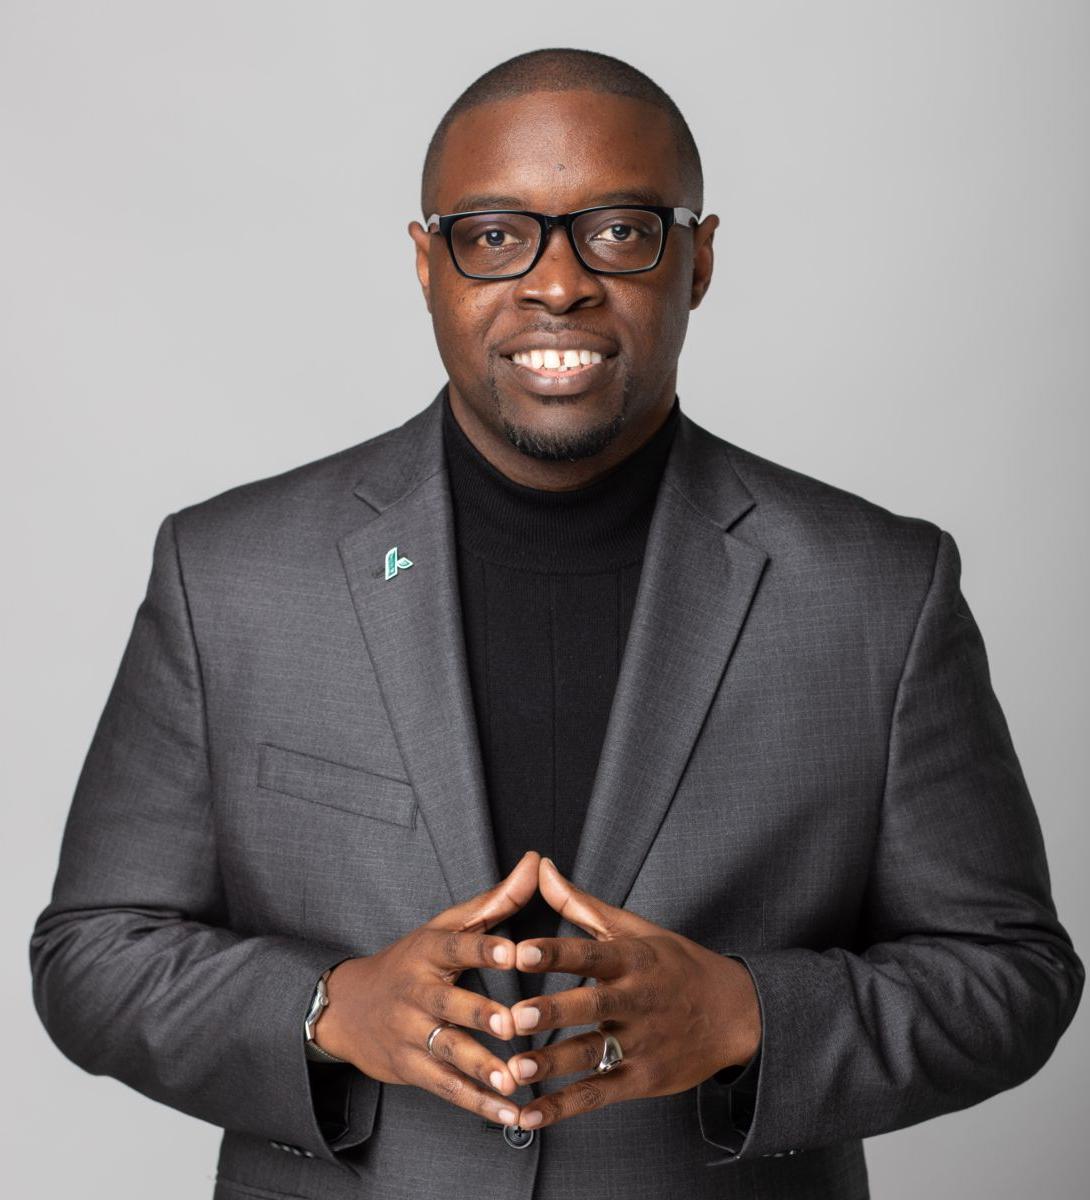 Dr. Jermaine Whirl, a smiling African American male, wearing a black suit with a white collared shirt, and black rimmed glasses. A round gold pin is on his left lapel.